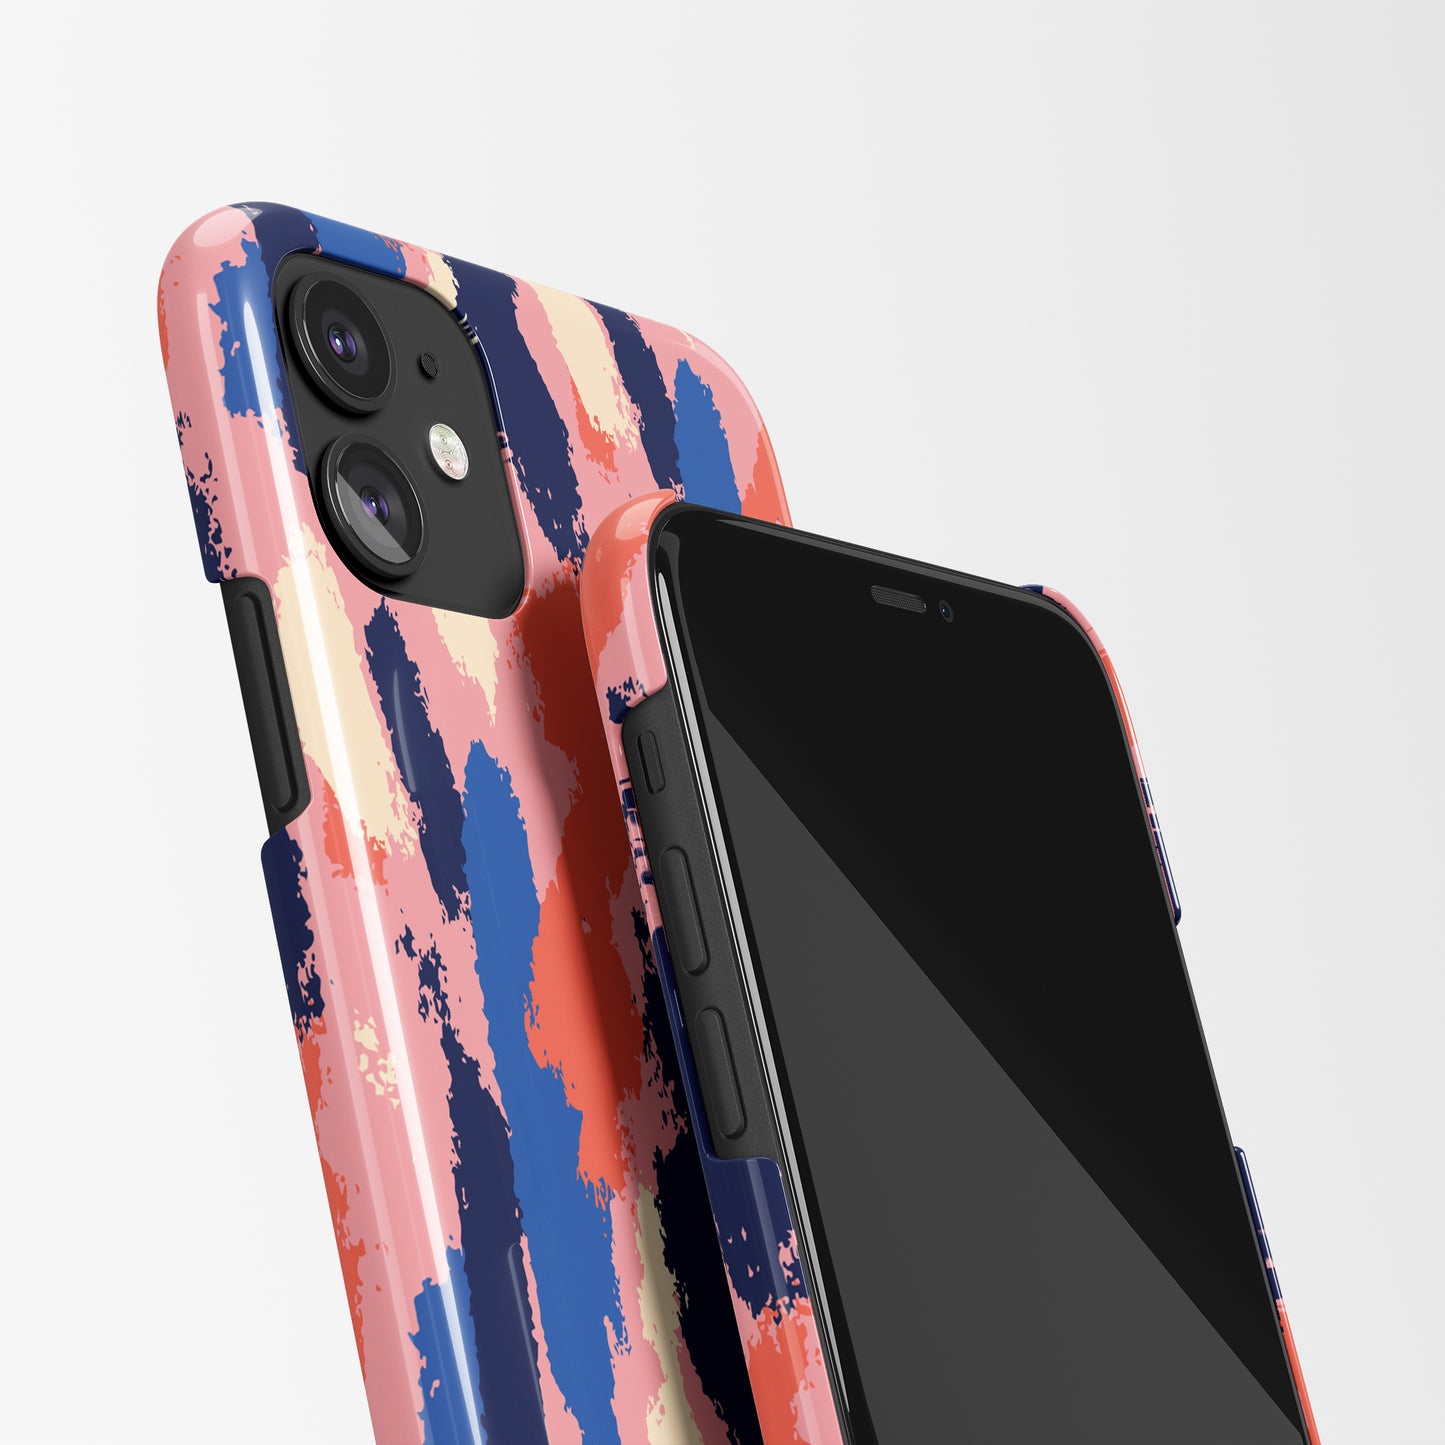 Colorful iPhone Case